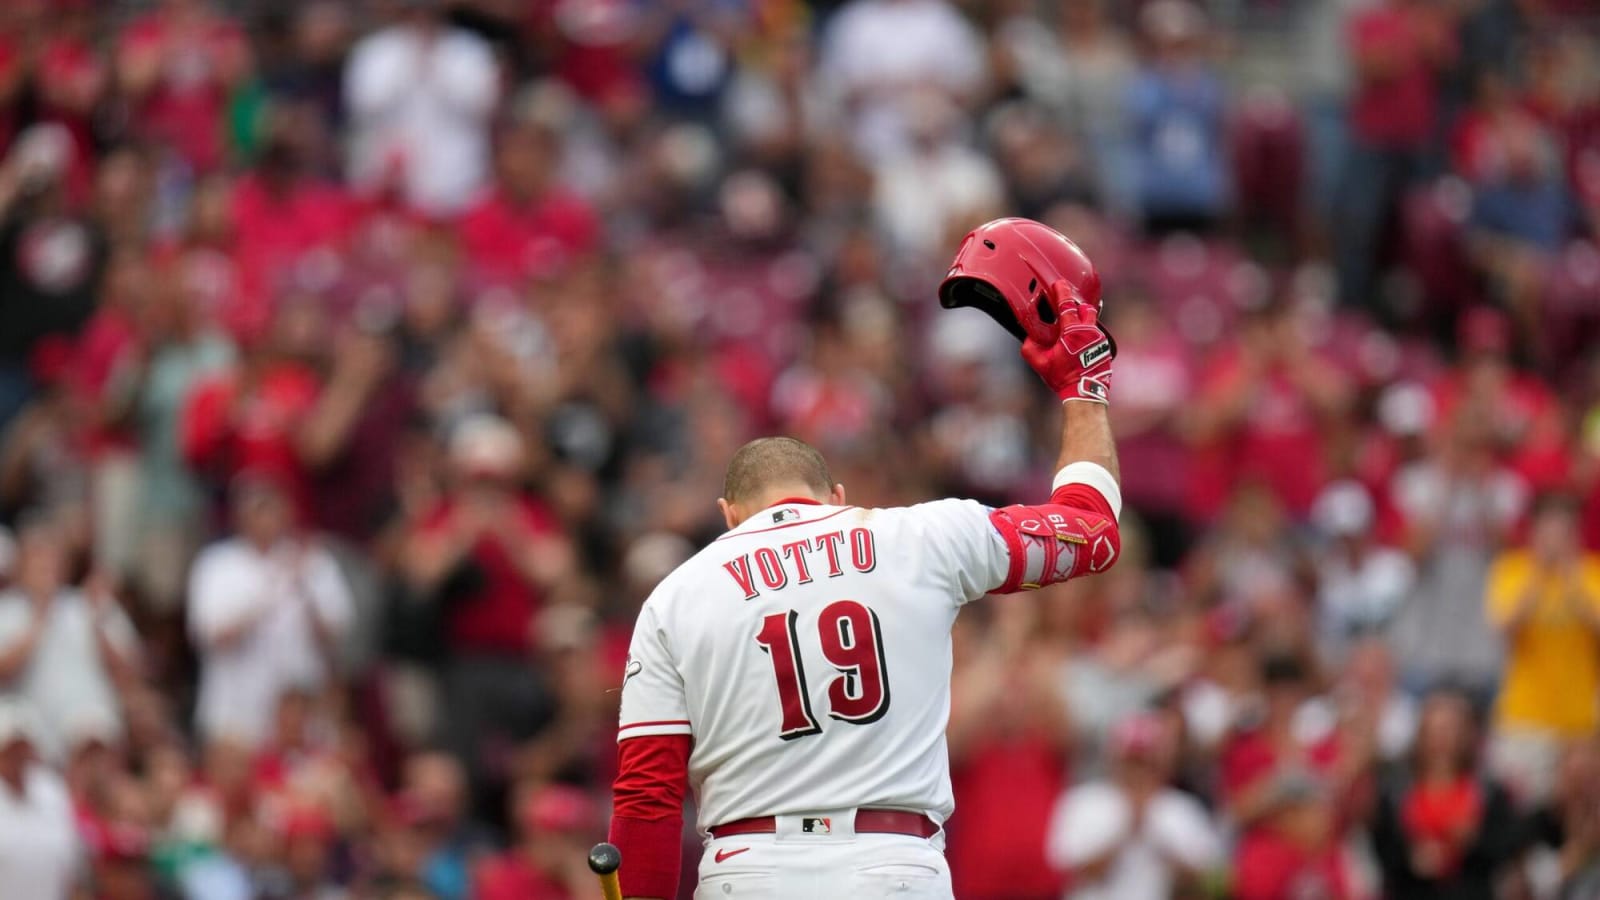 Joey Votto’s homecoming adds some excitement around the Blue Jays after a long winter